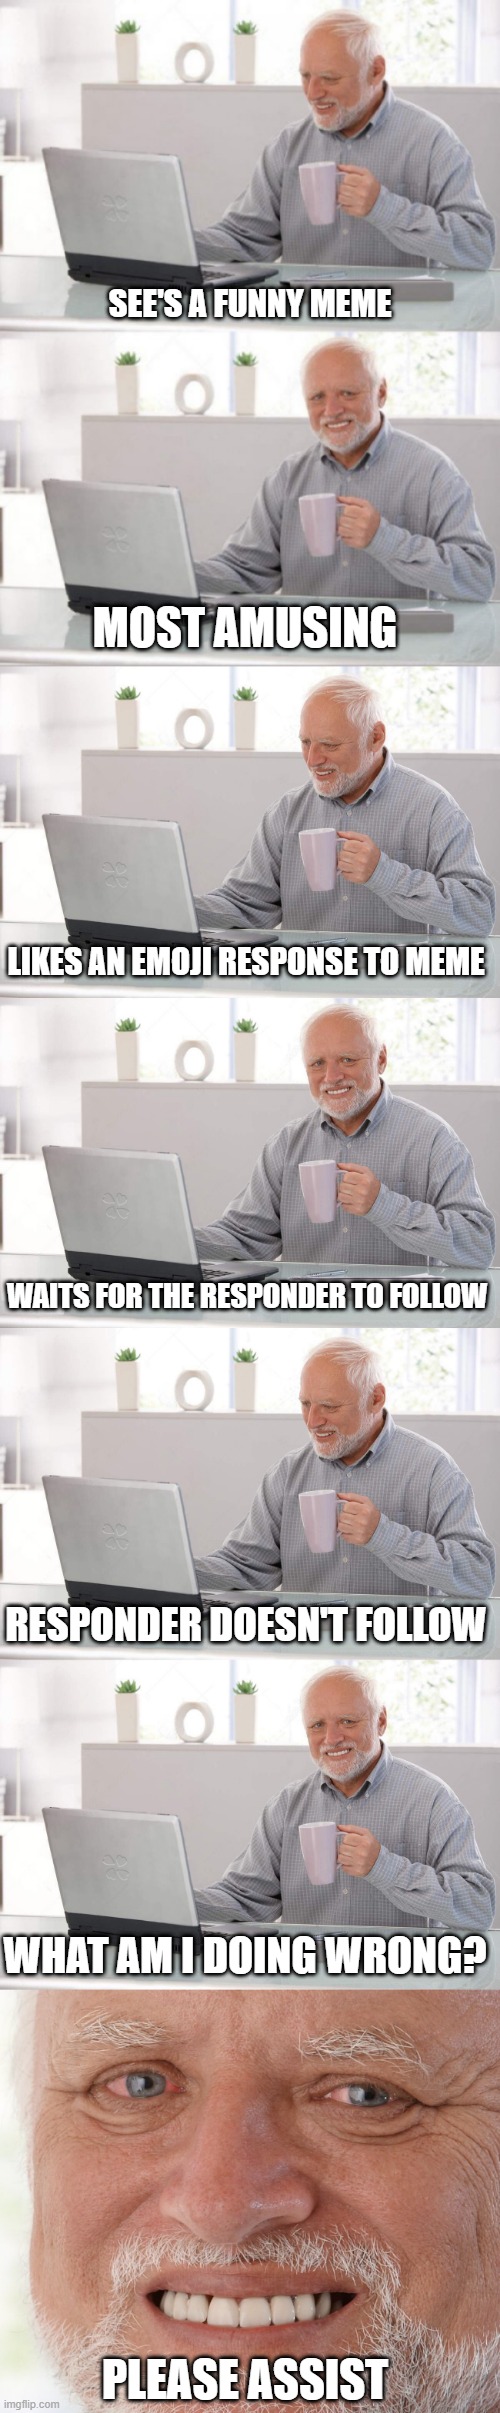 Twitter bollocks | SEE'S A FUNNY MEME; MOST AMUSING; LIKES AN EMOJI RESPONSE TO MEME; WAITS FOR THE RESPONDER TO FOLLOW; RESPONDER DOESN'T FOLLOW; WHAT AM I DOING WRONG? PLEASE ASSIST | image tagged in old guy pc,hide the pain harold,old man cup of coffee | made w/ Imgflip meme maker